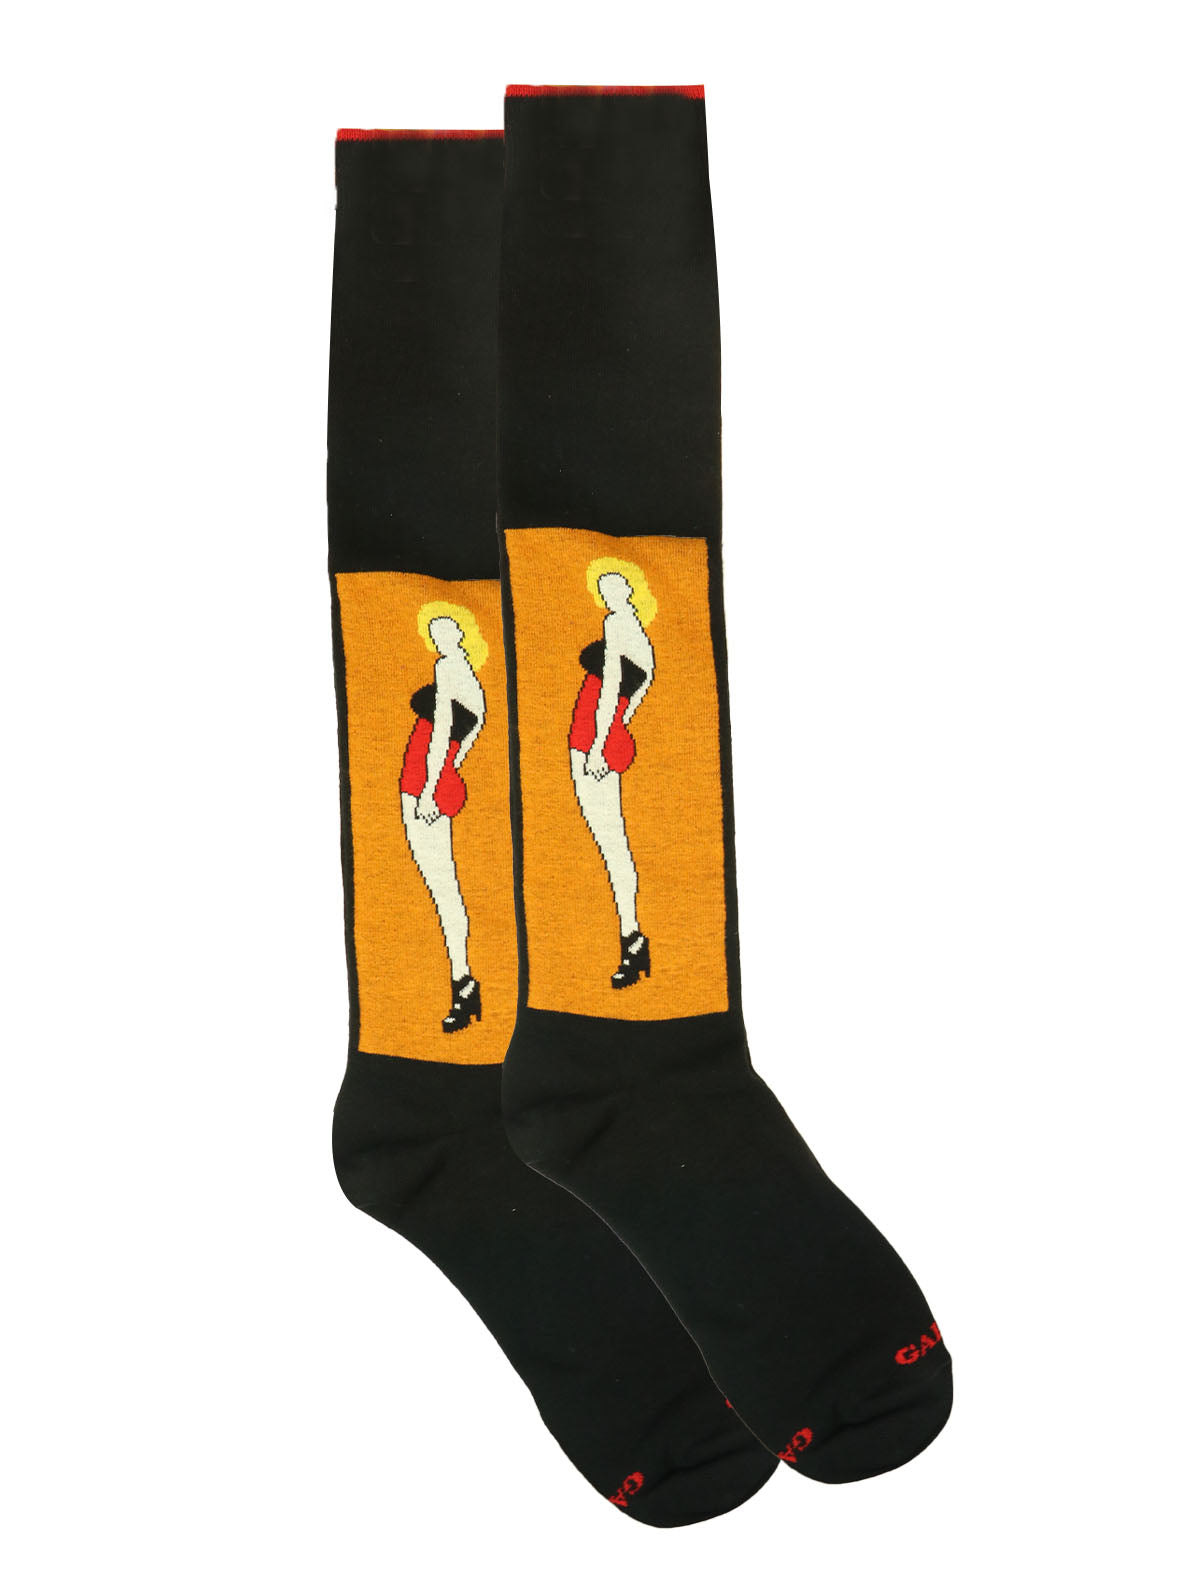 Gallo Long Socks in Black w/ Abstract Character Print